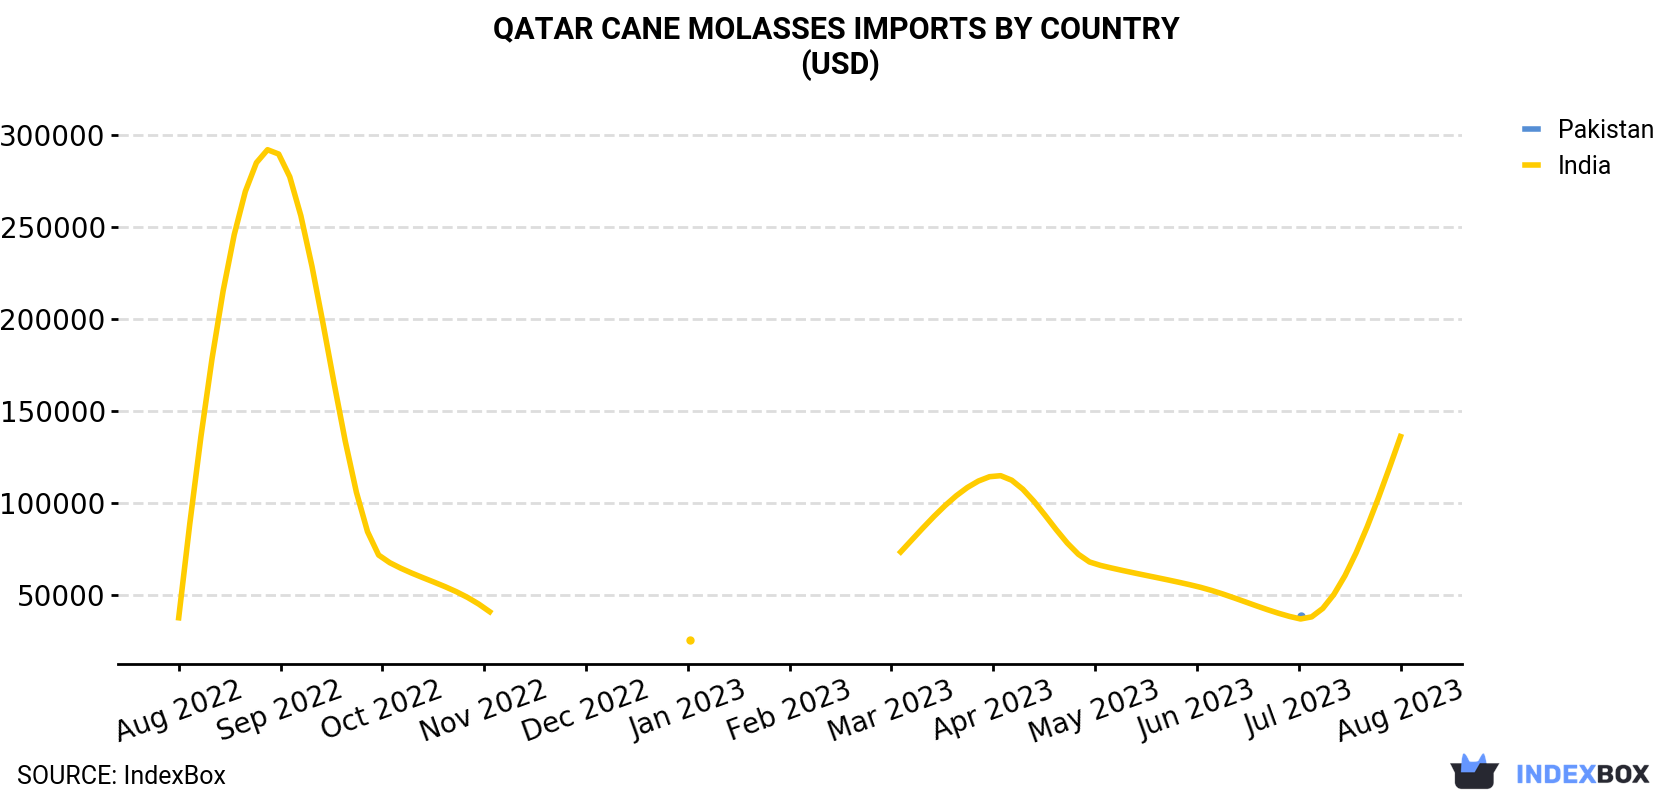 Qatar Cane Molasses Imports By Country (USD)